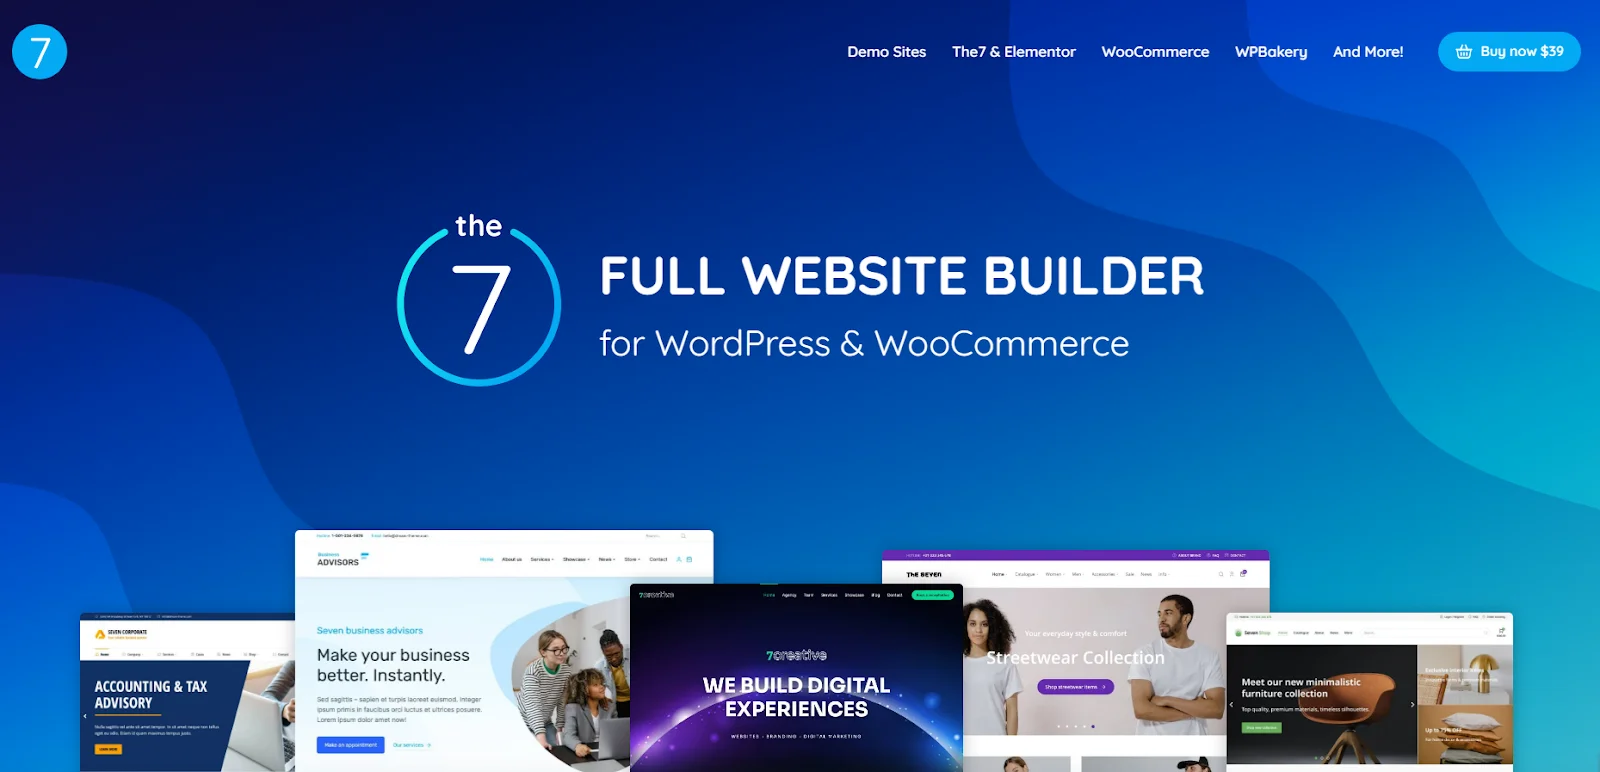 The7 is a popular WordPress theme with many layouts and plugins